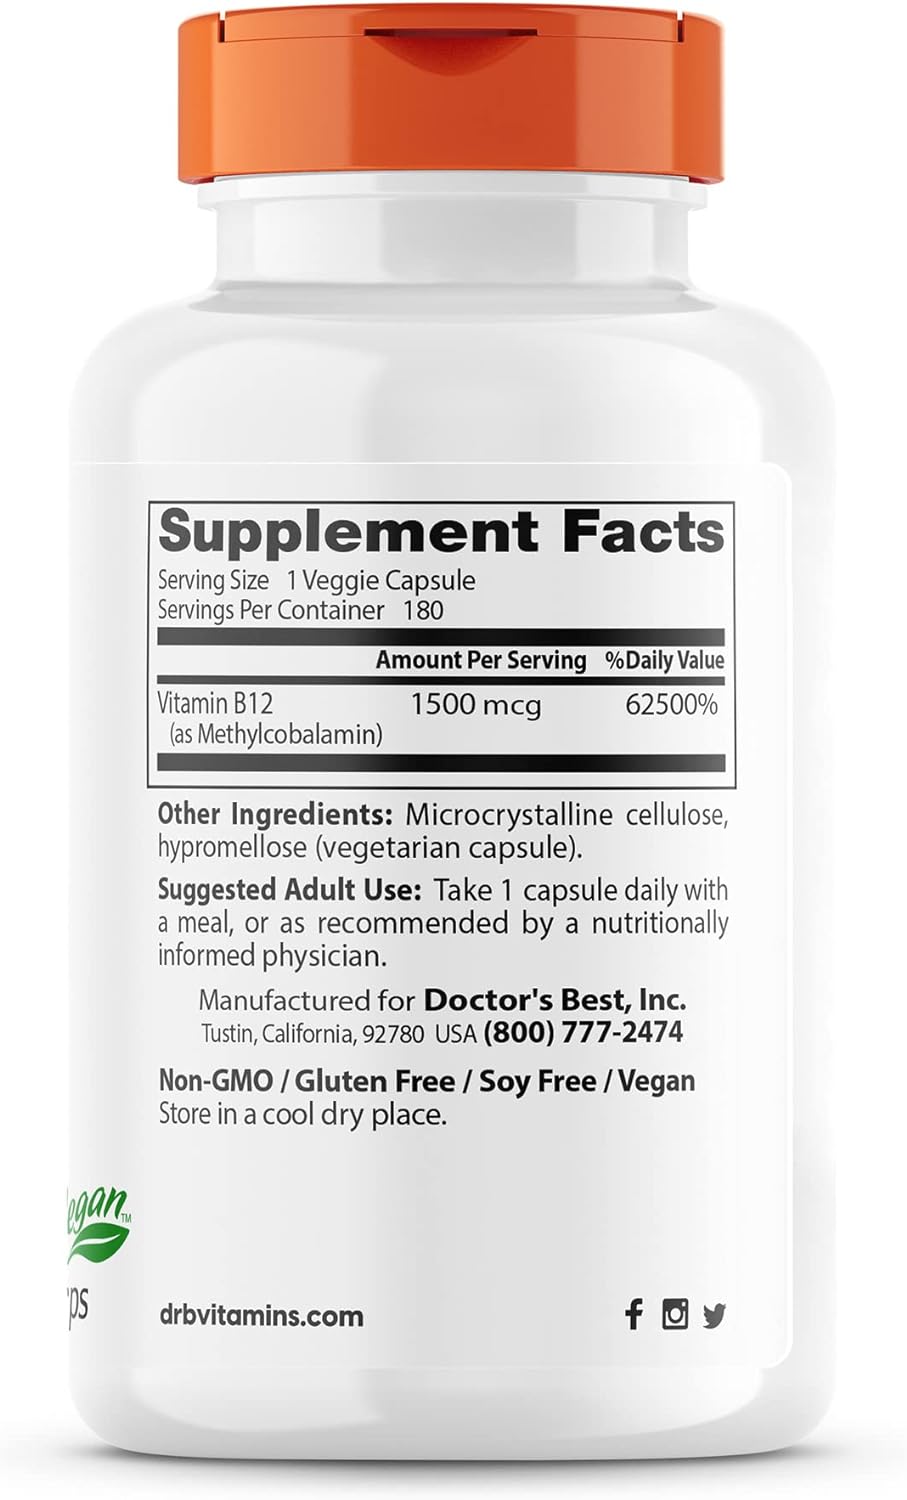 Doctors Best Fully Active B12 1500 Mcg, Supports Energy, Mood, Circulation, Non-GMO, Vegan, Gluten Free, 180 Count